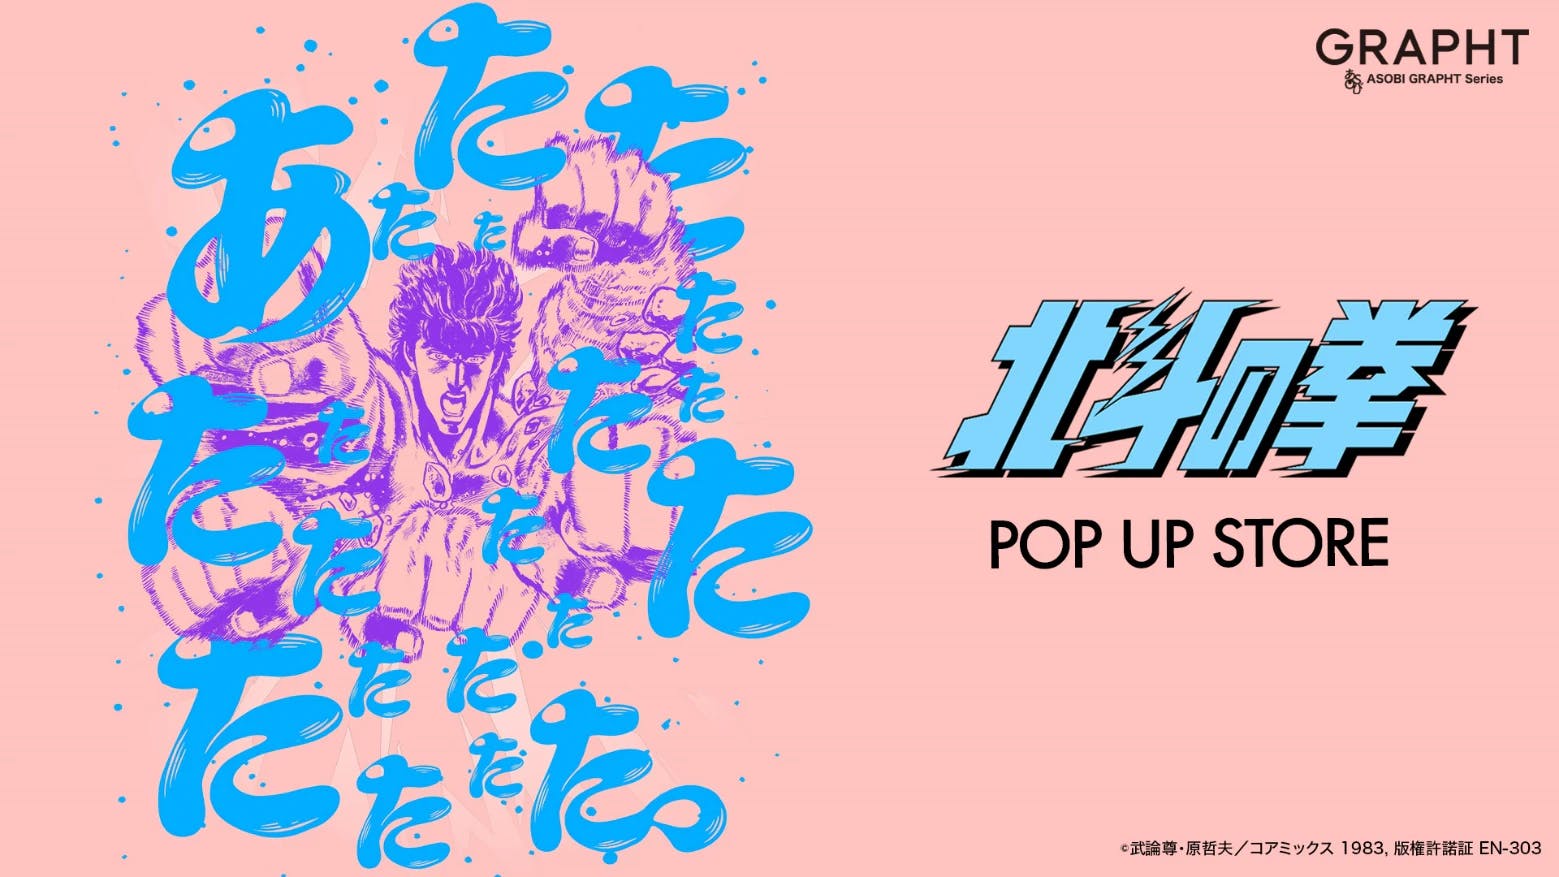 From May 14th (Tue) - [Fist of the North Star POP UP STORE] Held in the event space outside the south ticket gates of JR Ikebukuro Station! Also scheduled to travel to Saitama, Chiba, and Kanagawa!!